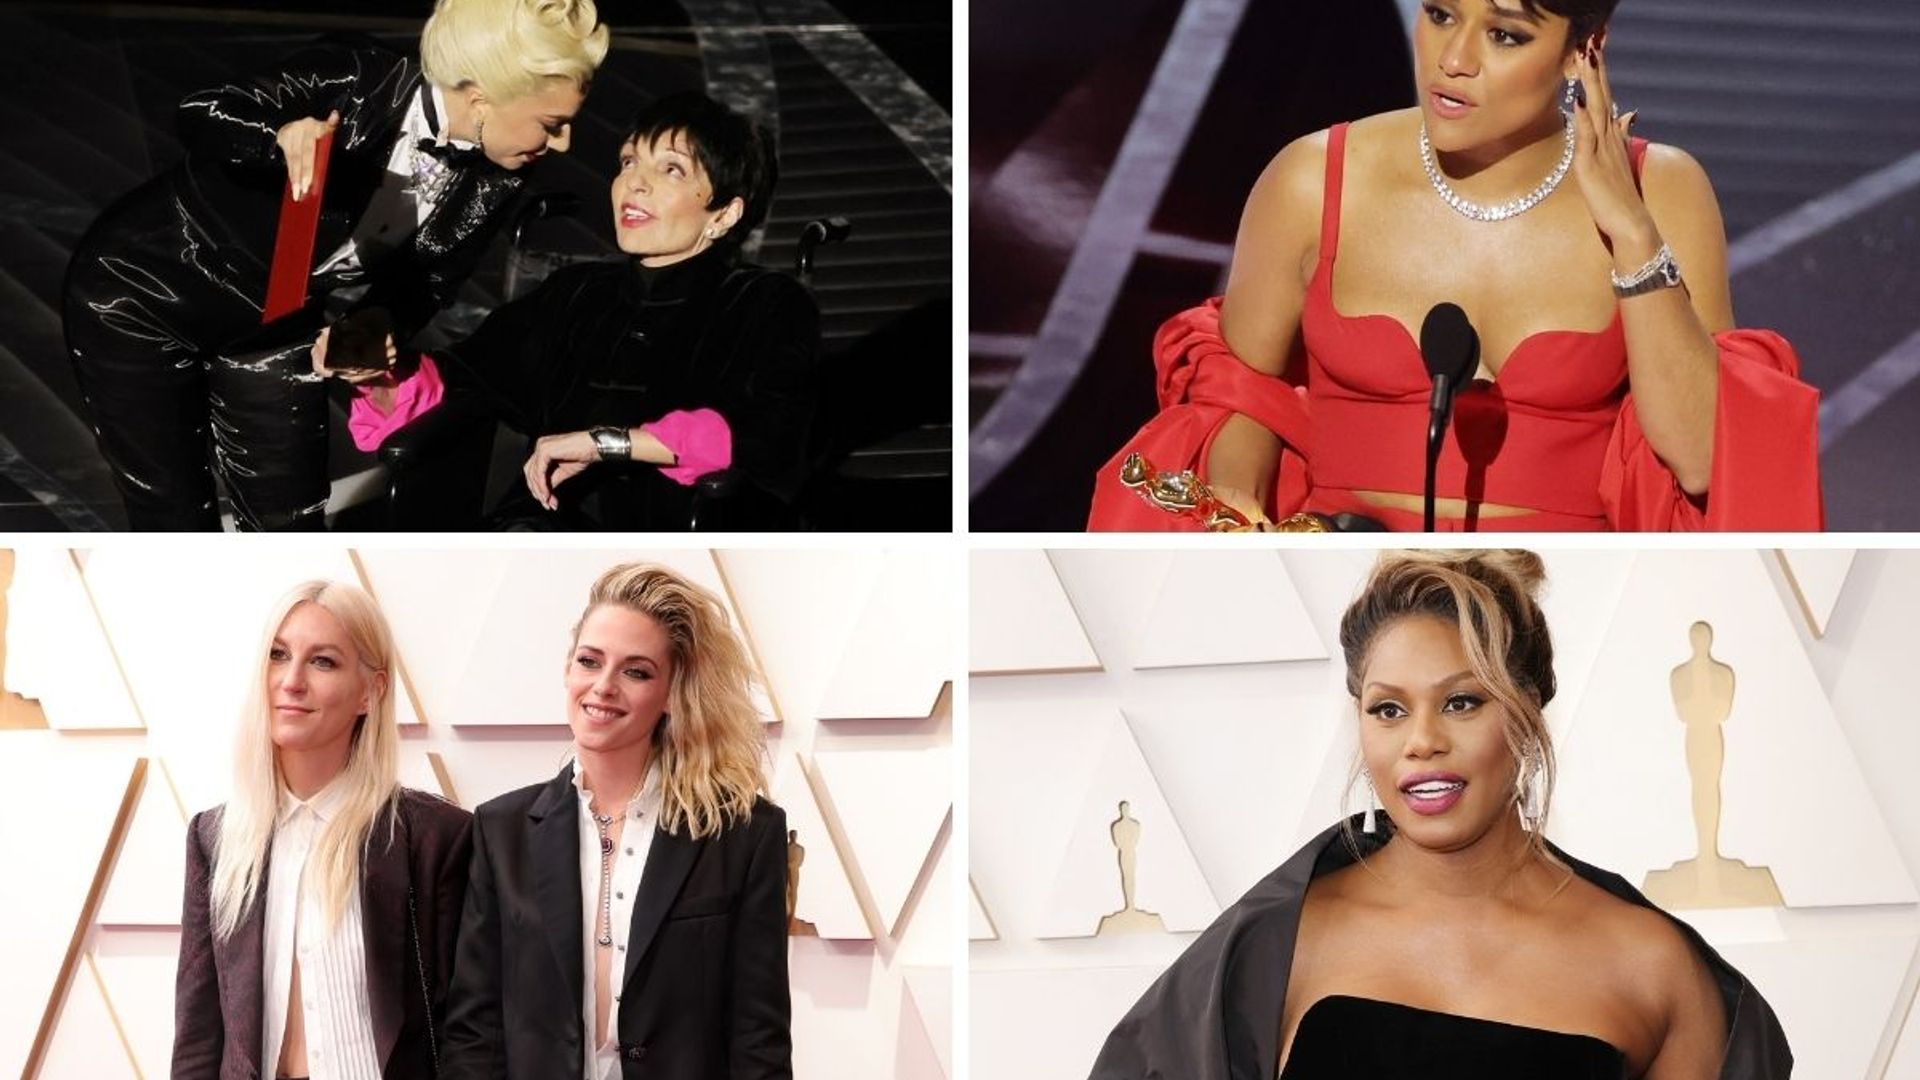 The 2022 Oscars were full of great moments for LGBTQ stars and representation